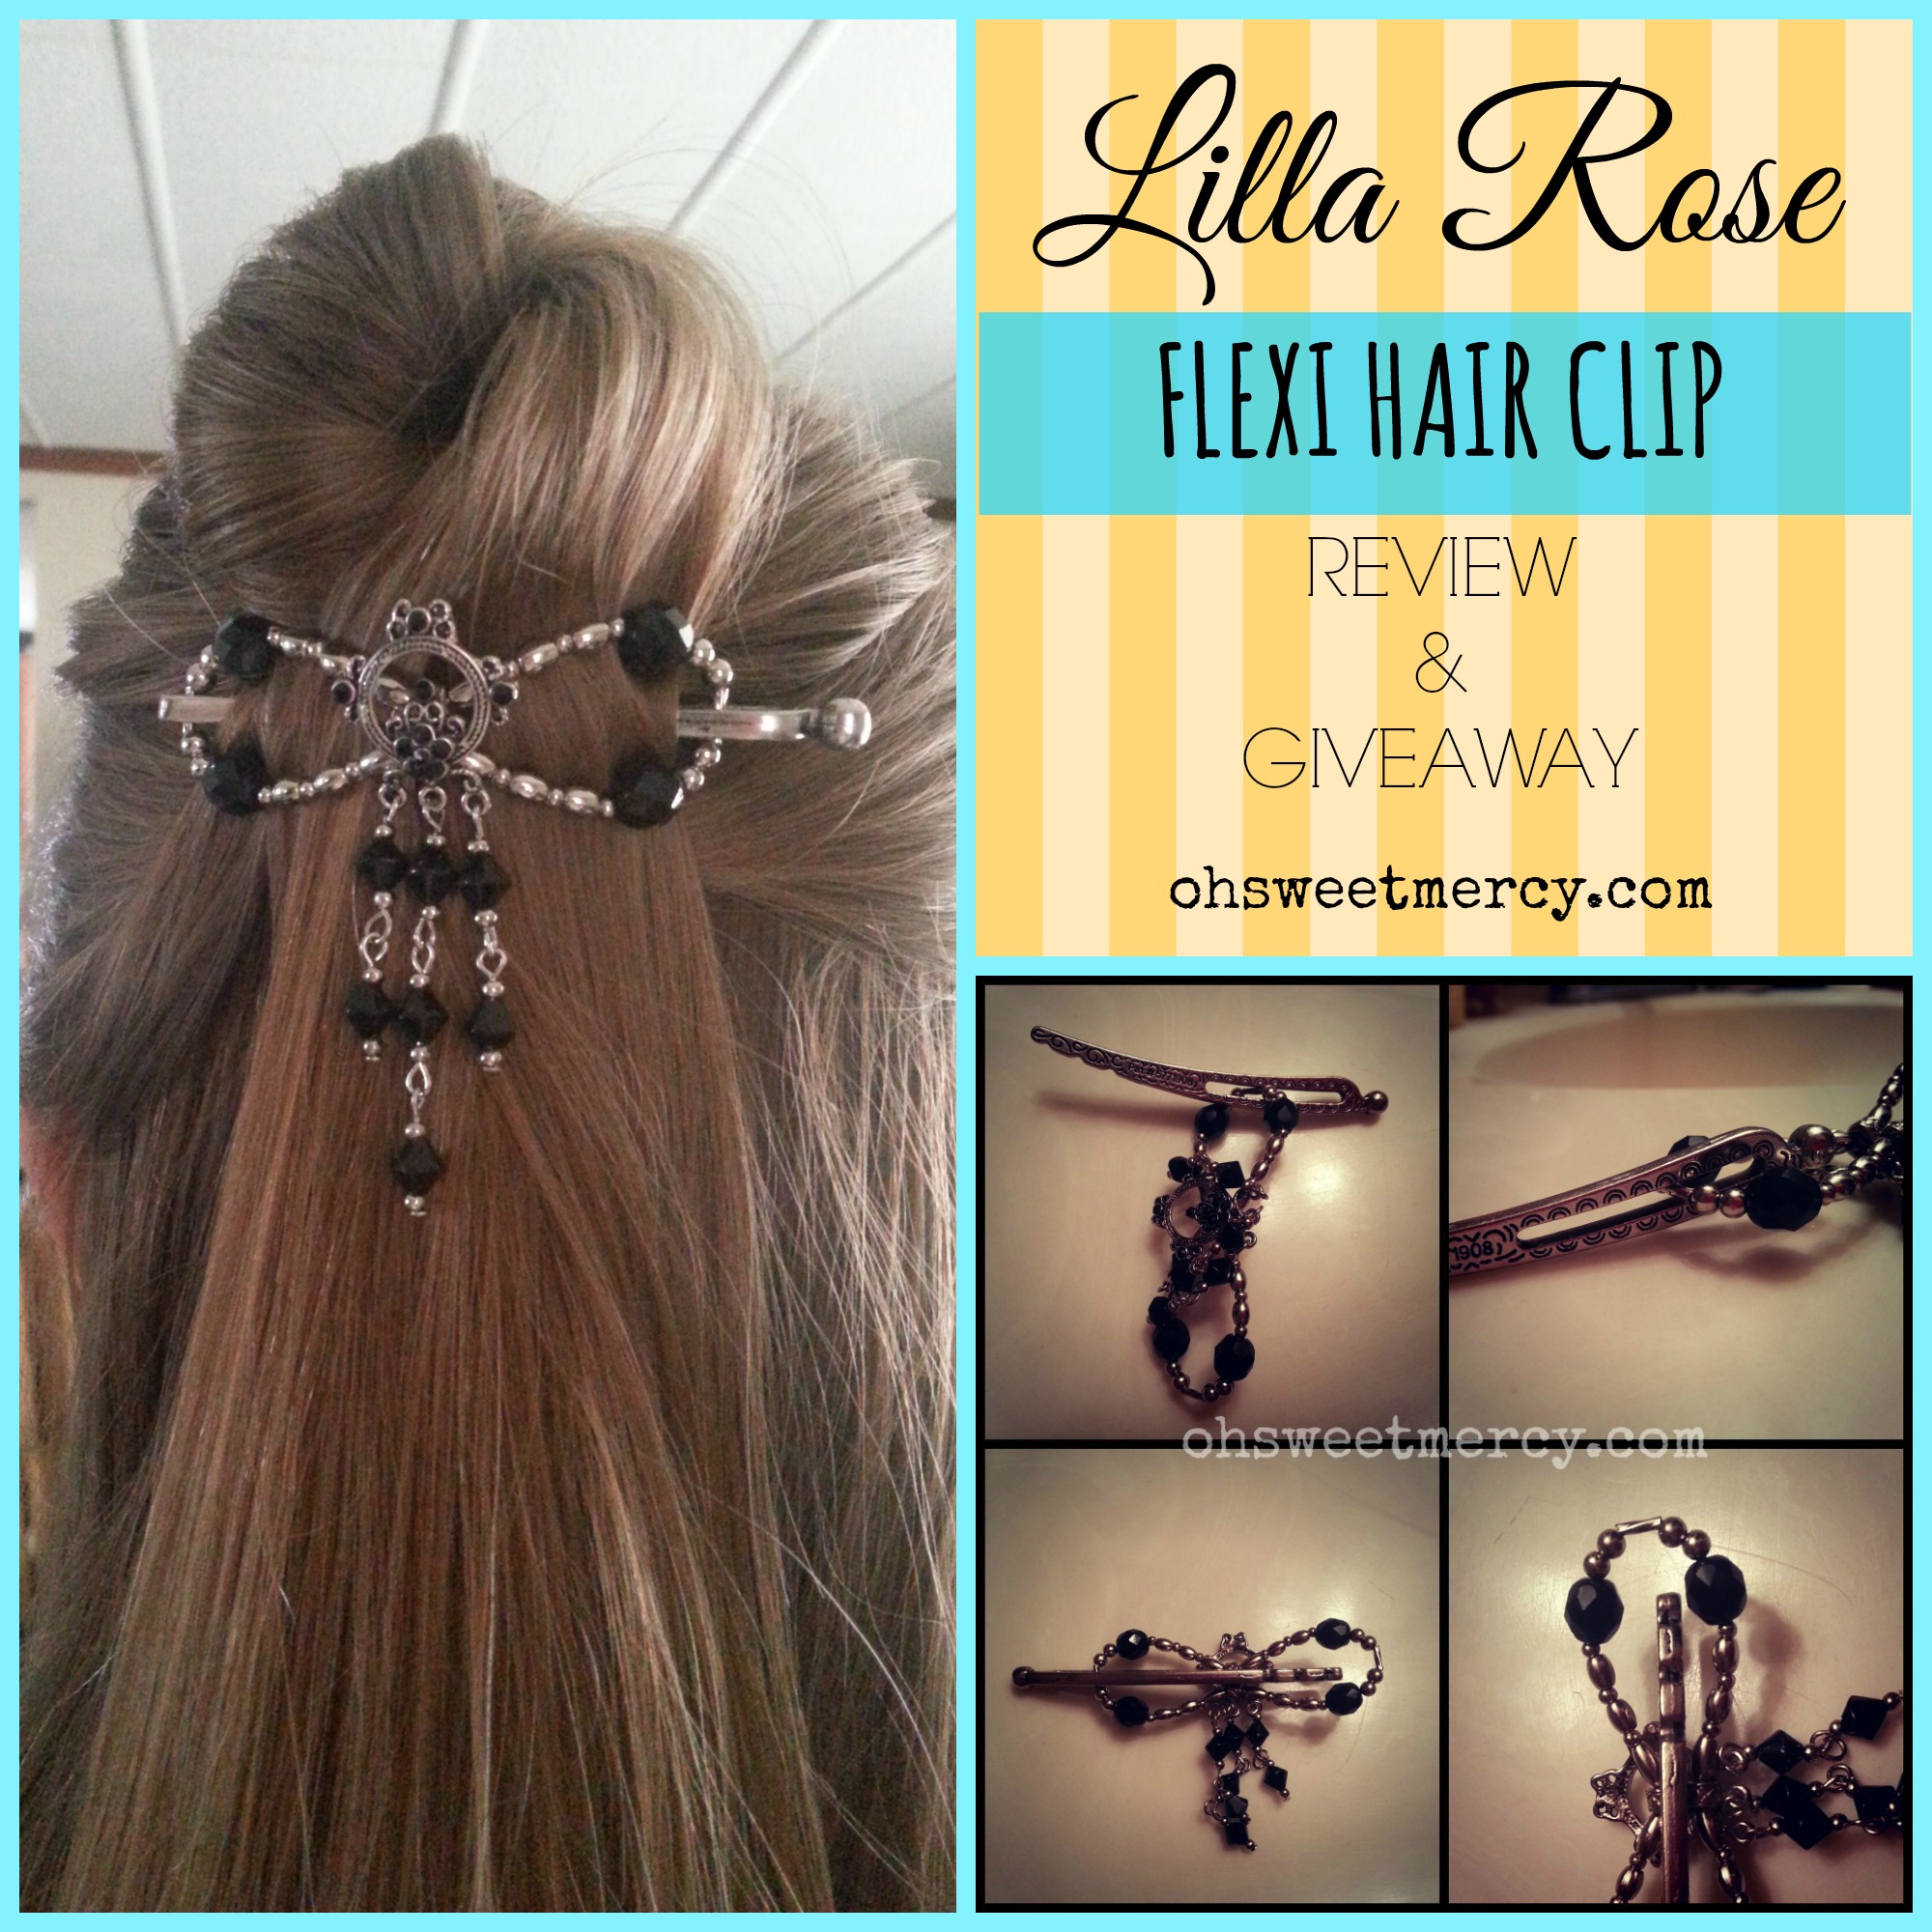 Lilla Rose Flexi Clip Review and Giveaway